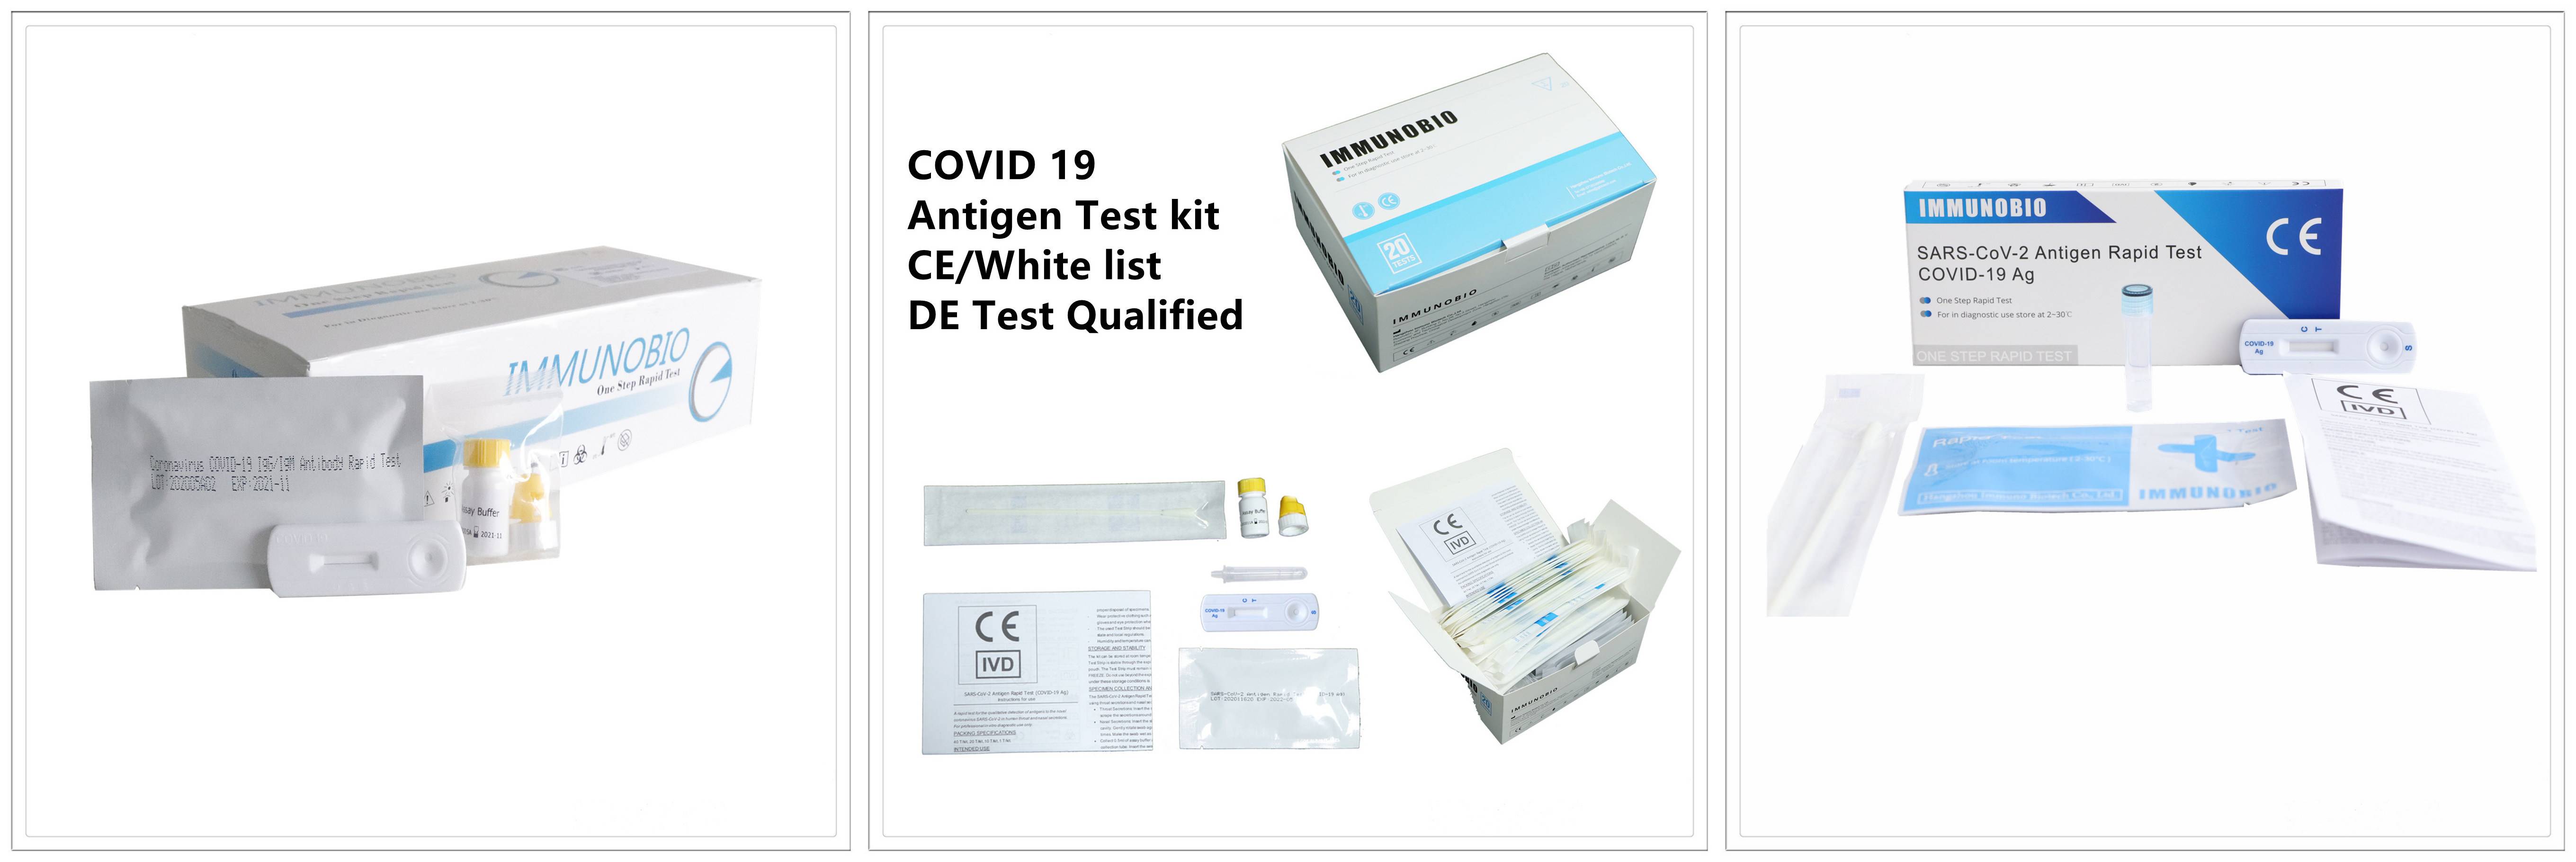 Recall issued for 56,000 COVID-19 antigen rapid tests